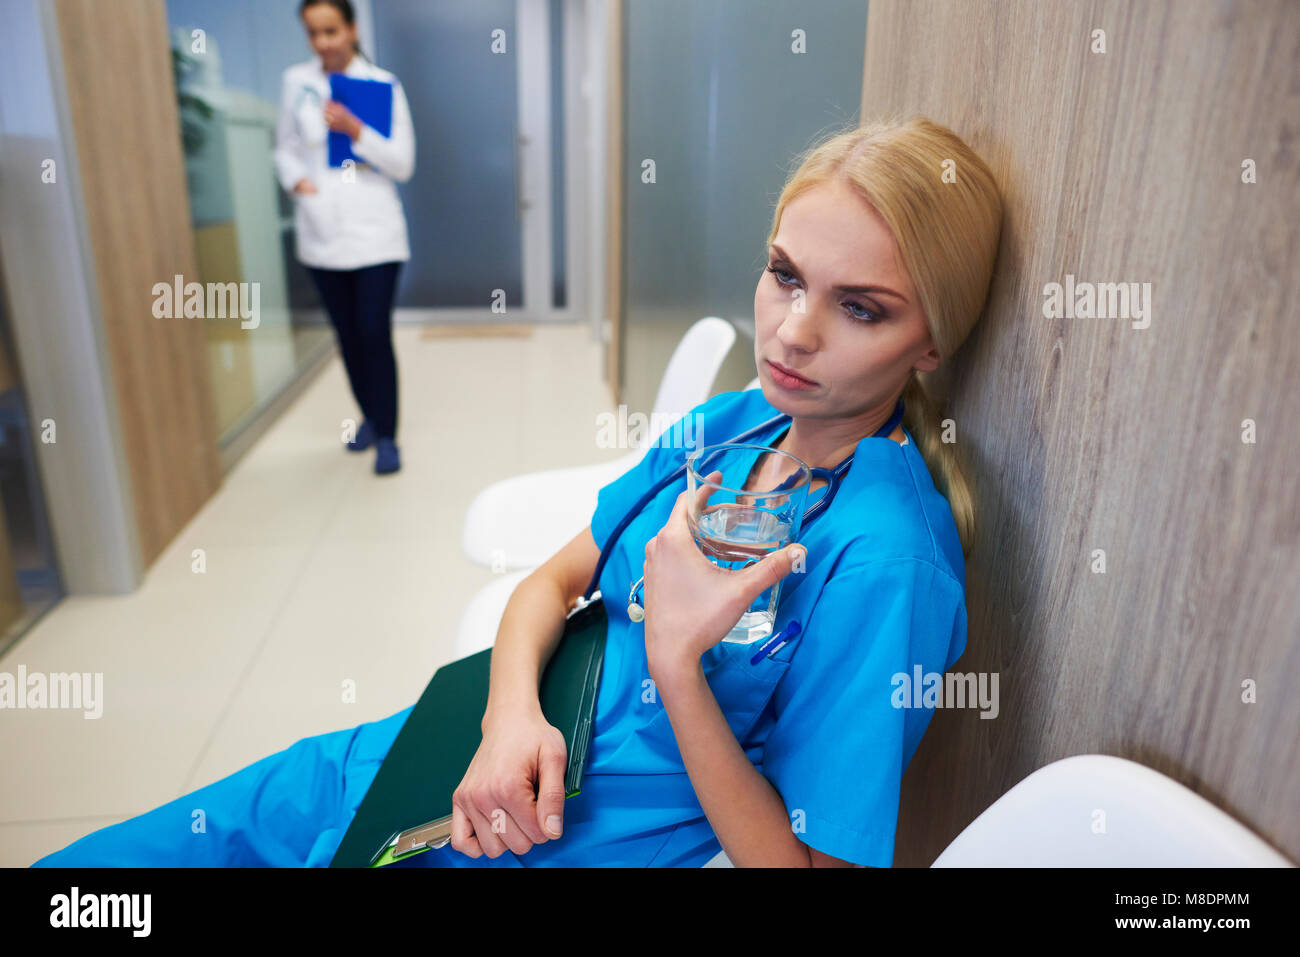 Surgeon sitting in hospital hallway, holding glass of water, pensive expression Stock Photo